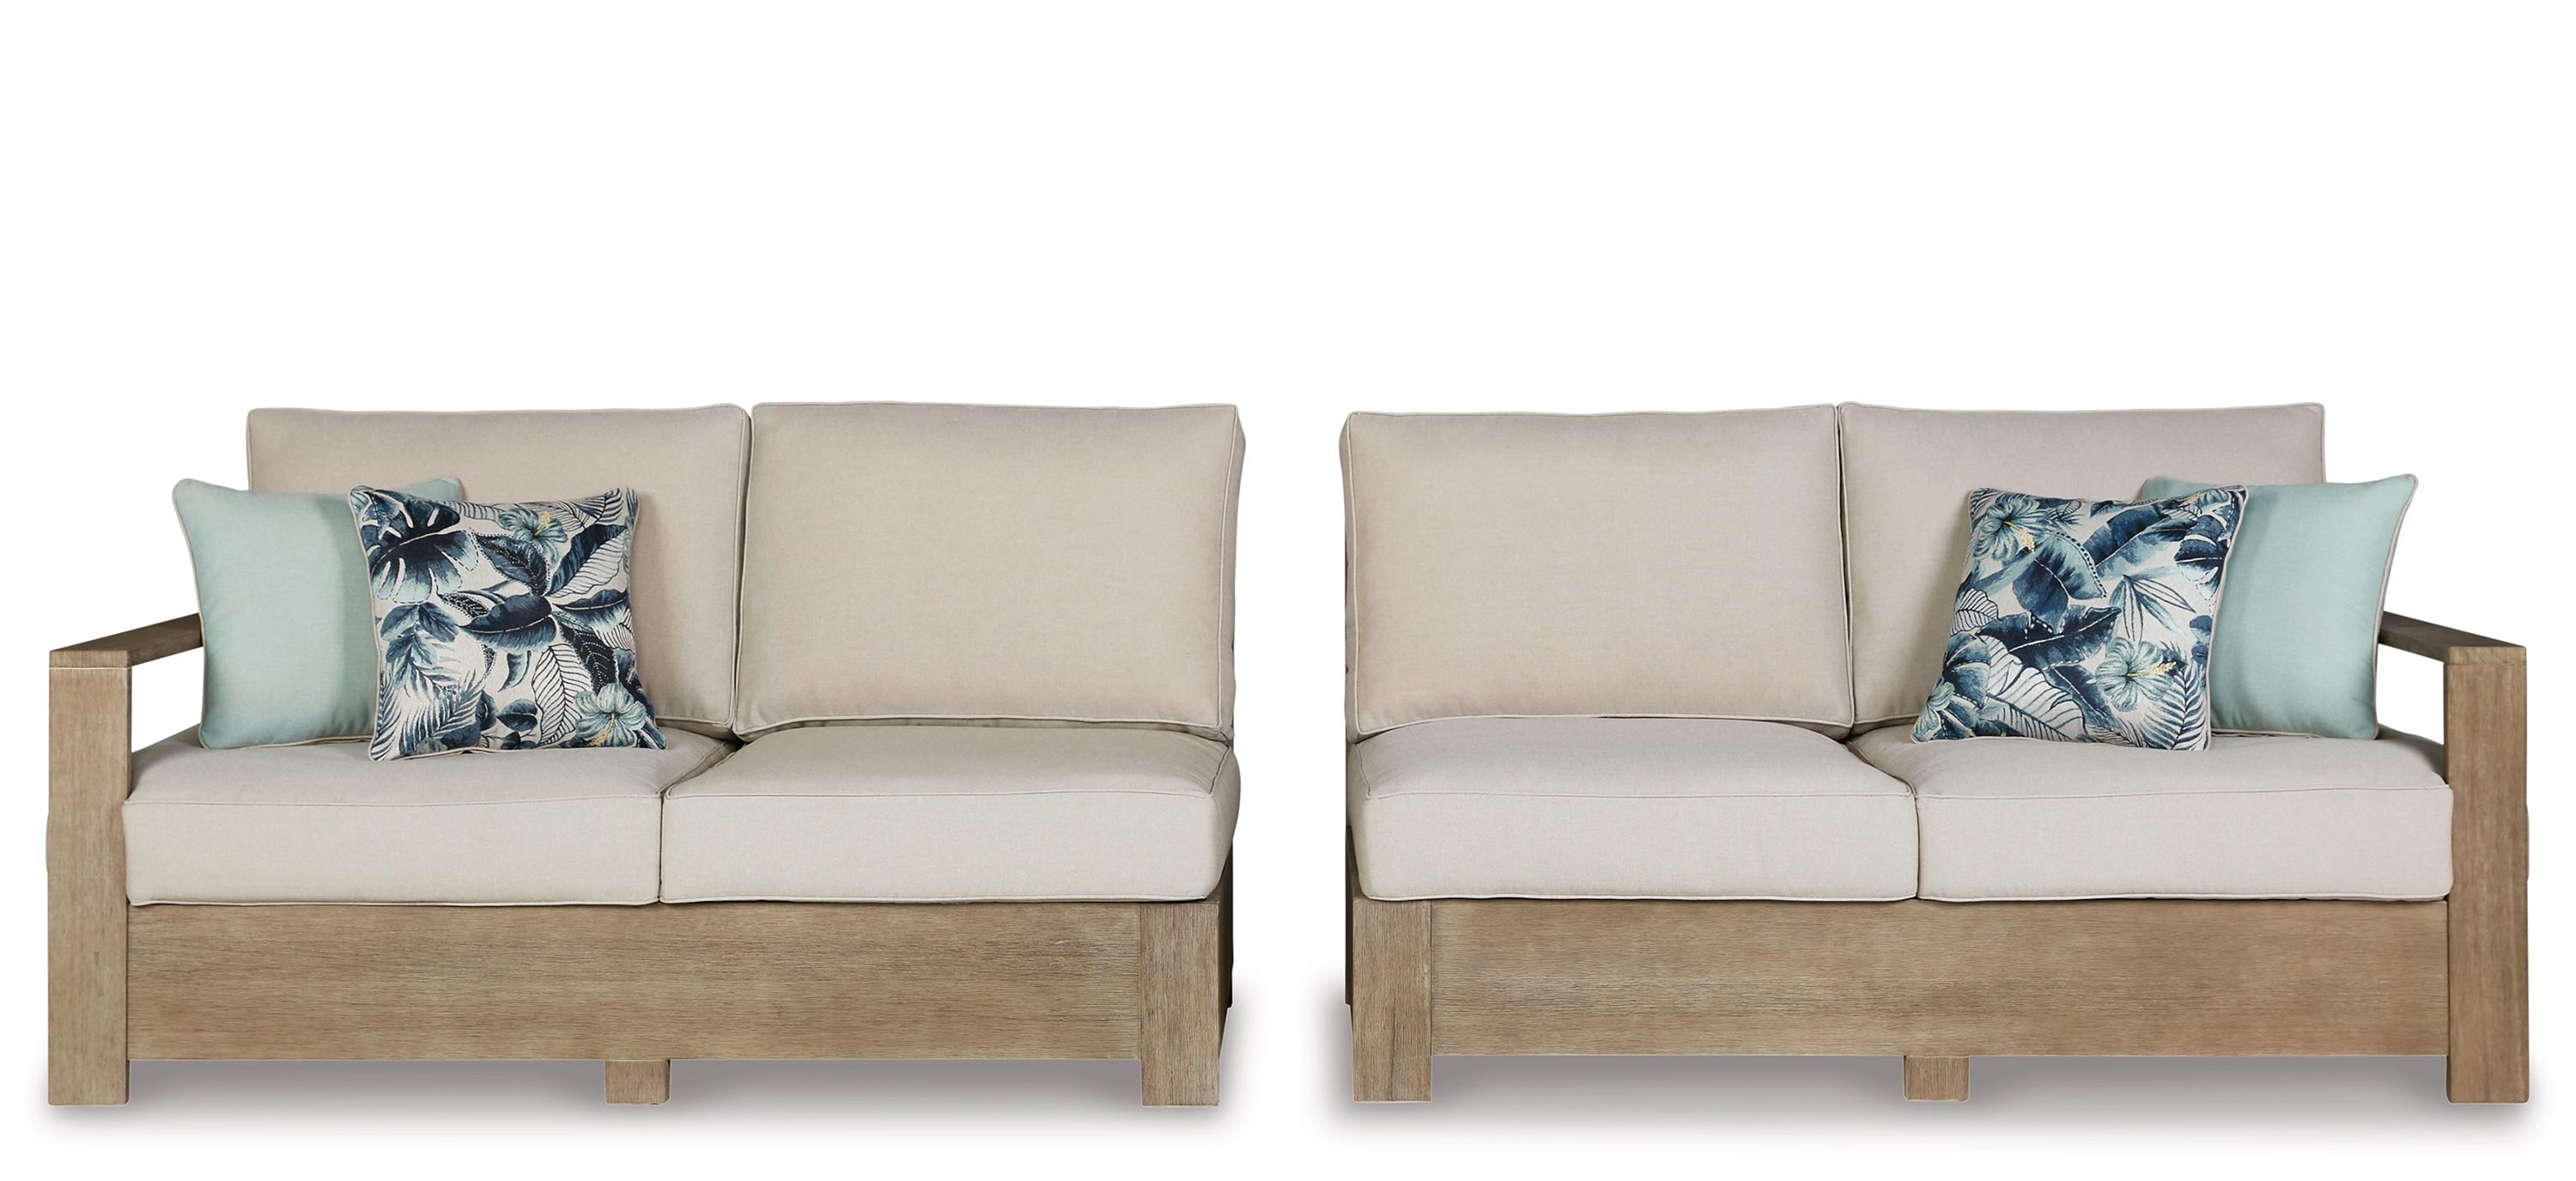 Silo Point Outdoor Right Arm Facing/Left Arm Facing Loveseat with Cushions: Set of 2